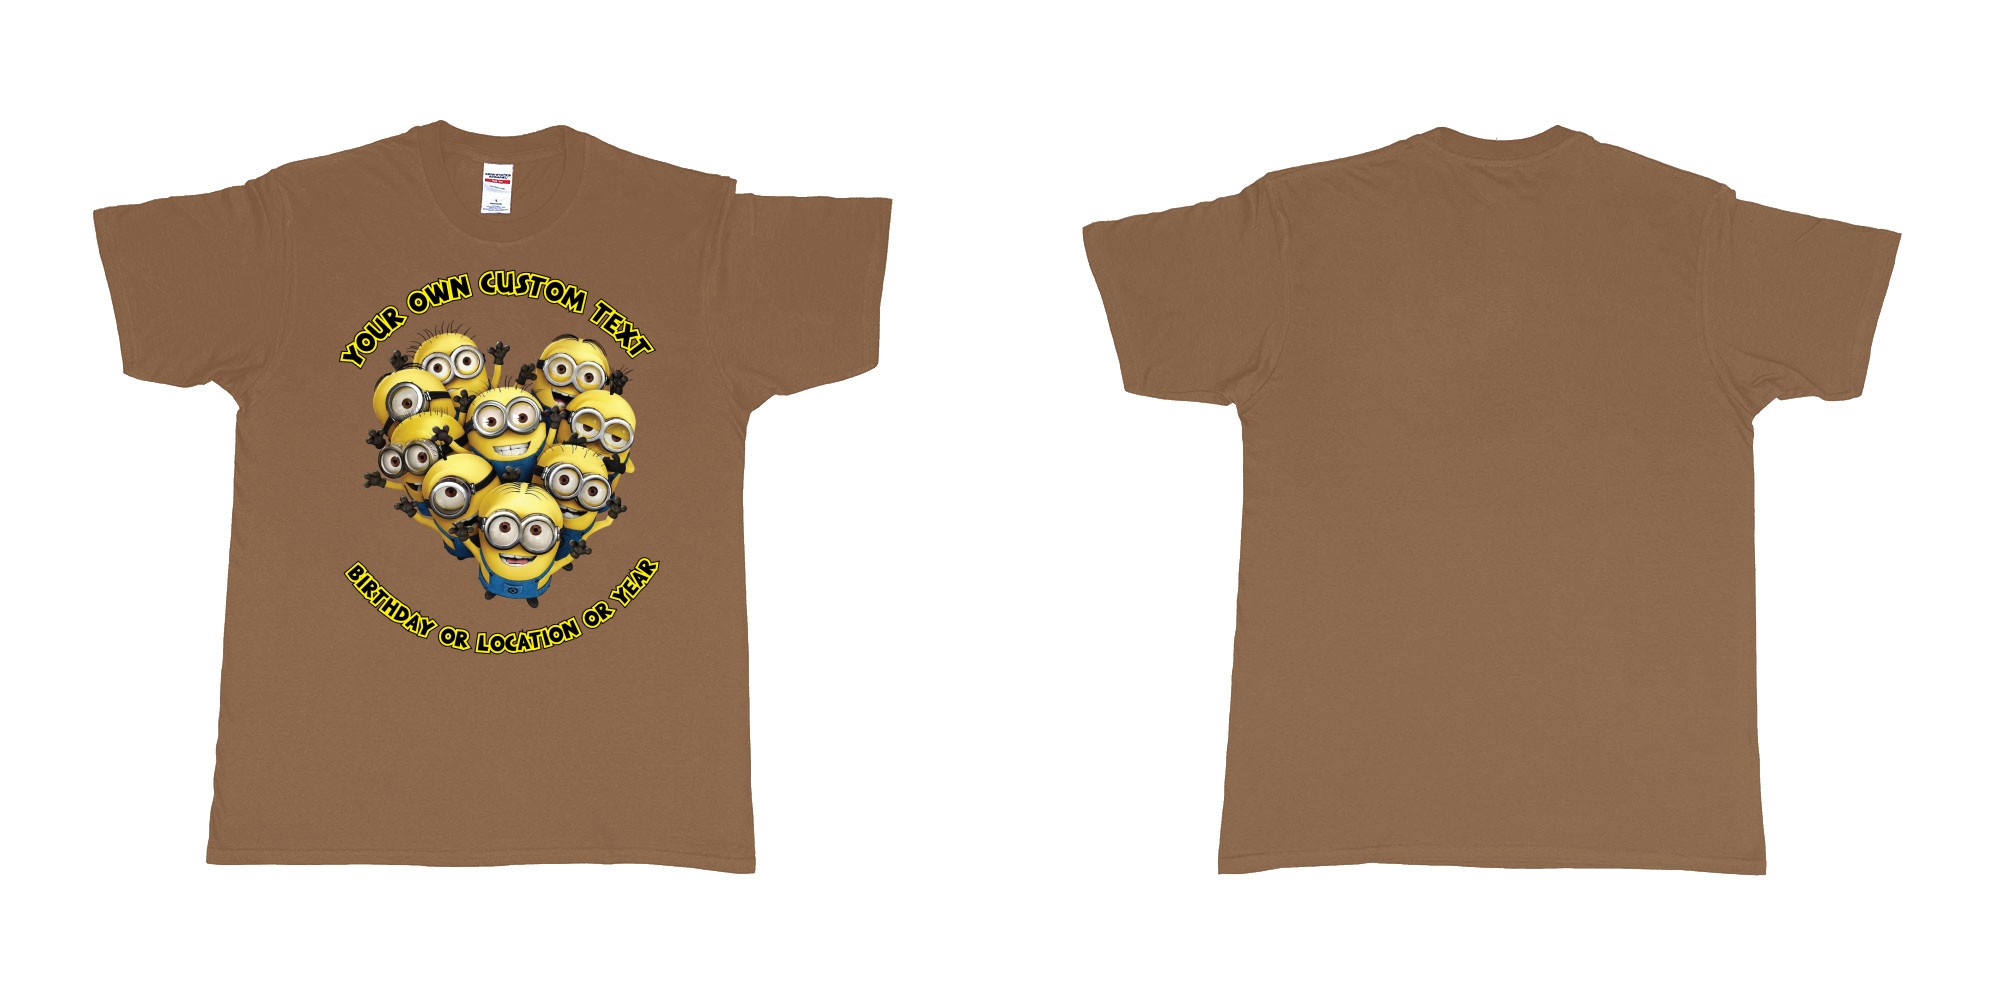 Custom tshirt design minions celebrating you in fabric color chestnut choice your own text made in Bali by The Pirate Way